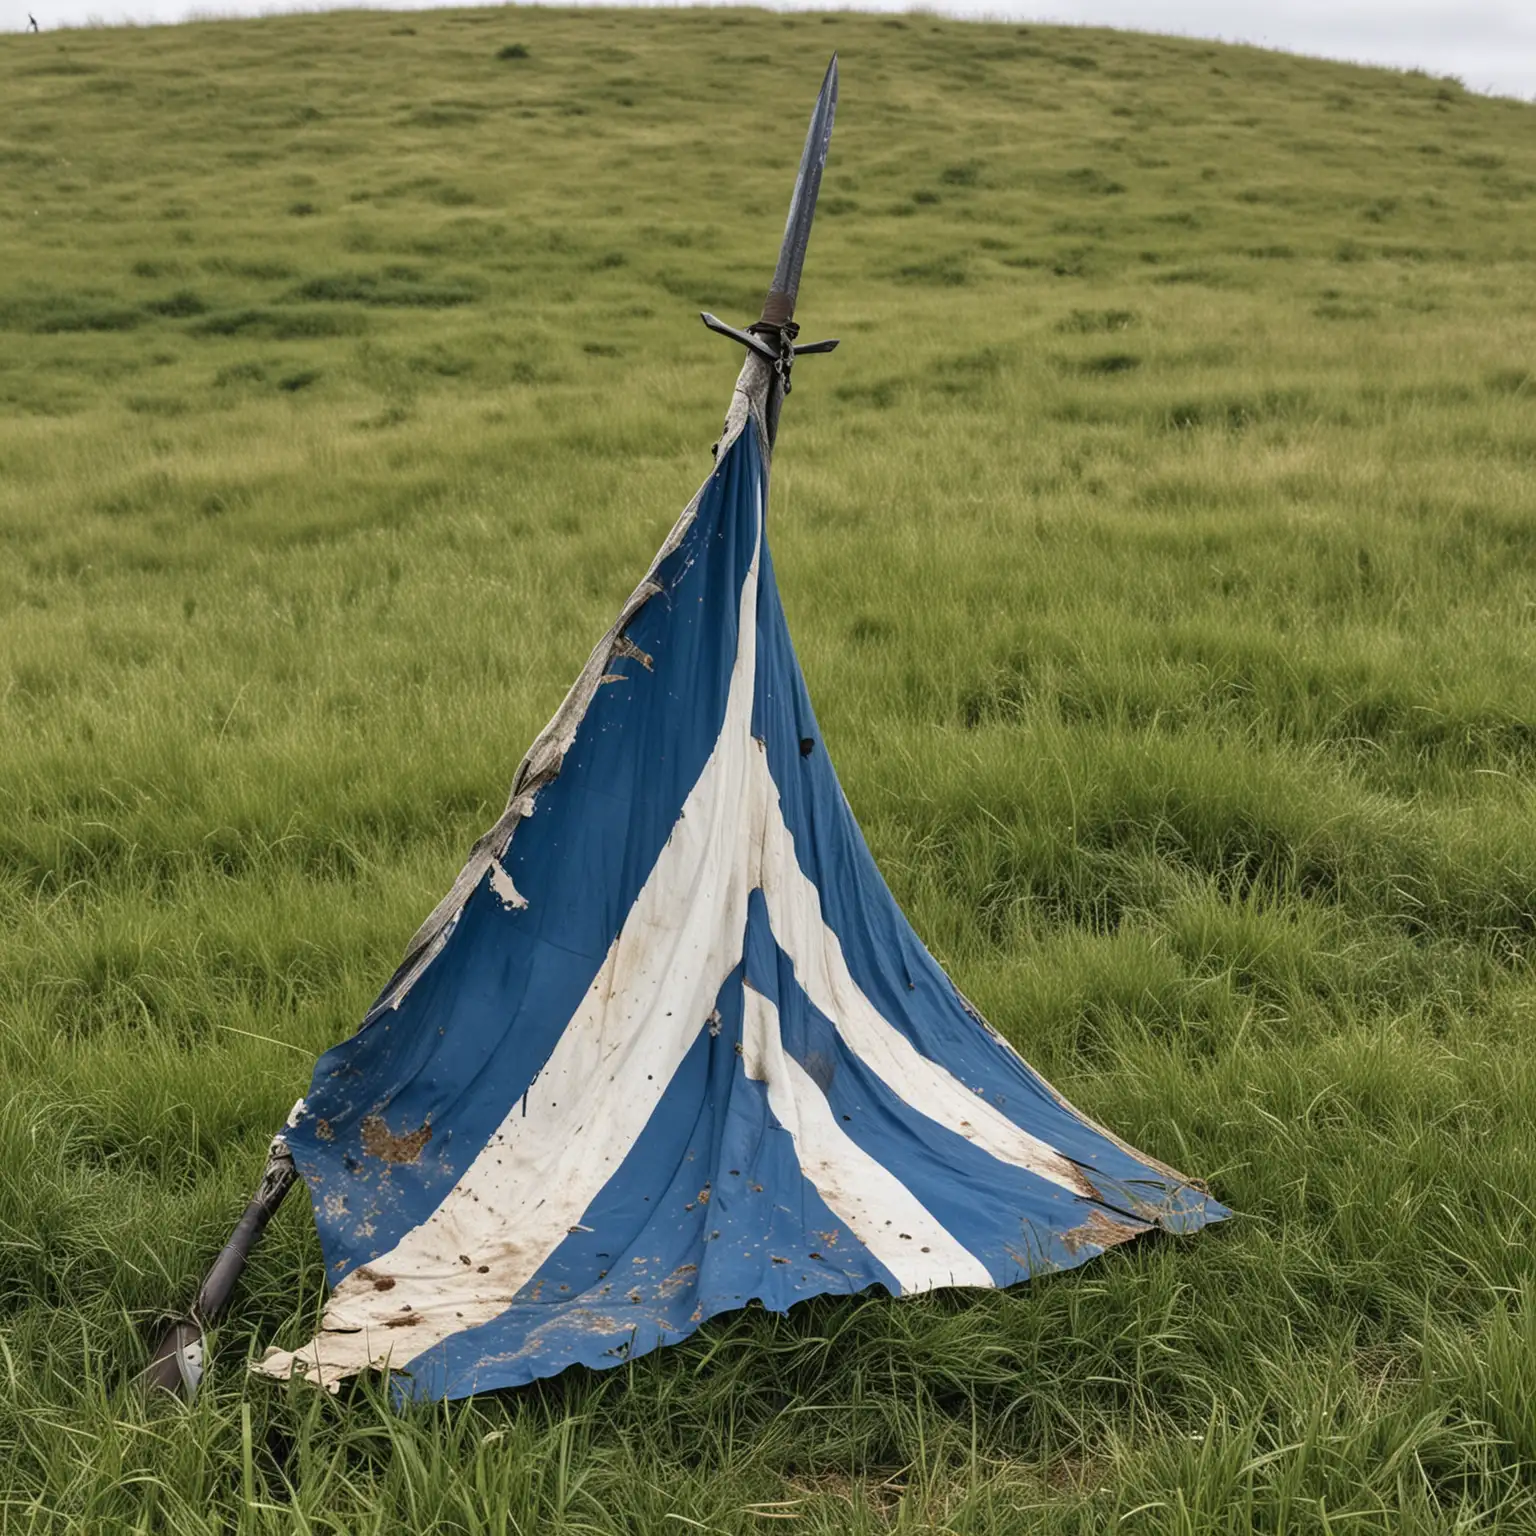 broad sword standing upright in grass with a blue and white damaged flag wrapped around it on a hill





